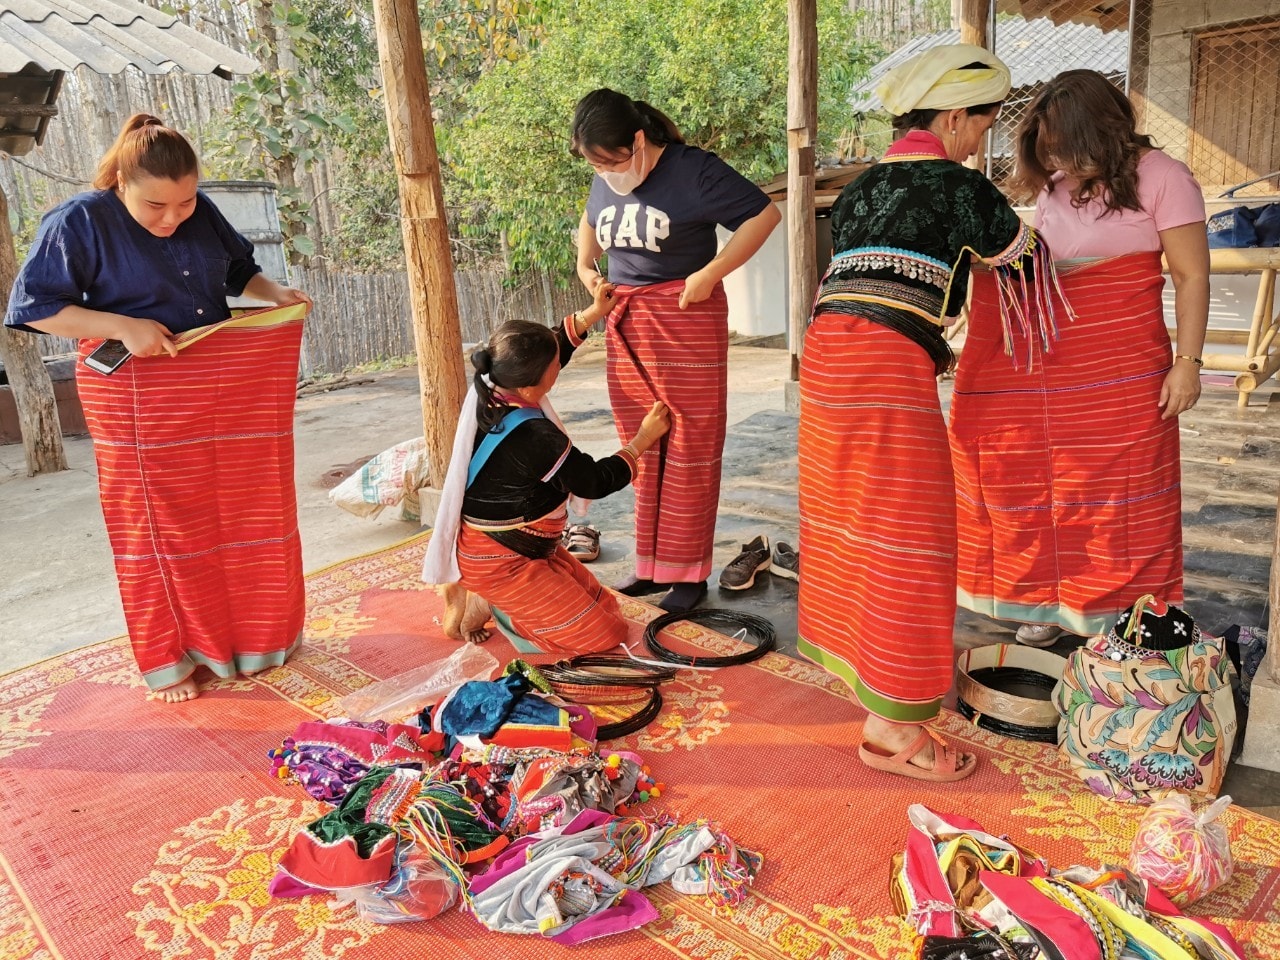 Tourists dress in ethnic clothing before they start the tour of a village in Chiang Mai, Thailand, on February 28, 2020. Photo courtesy of Wocation.